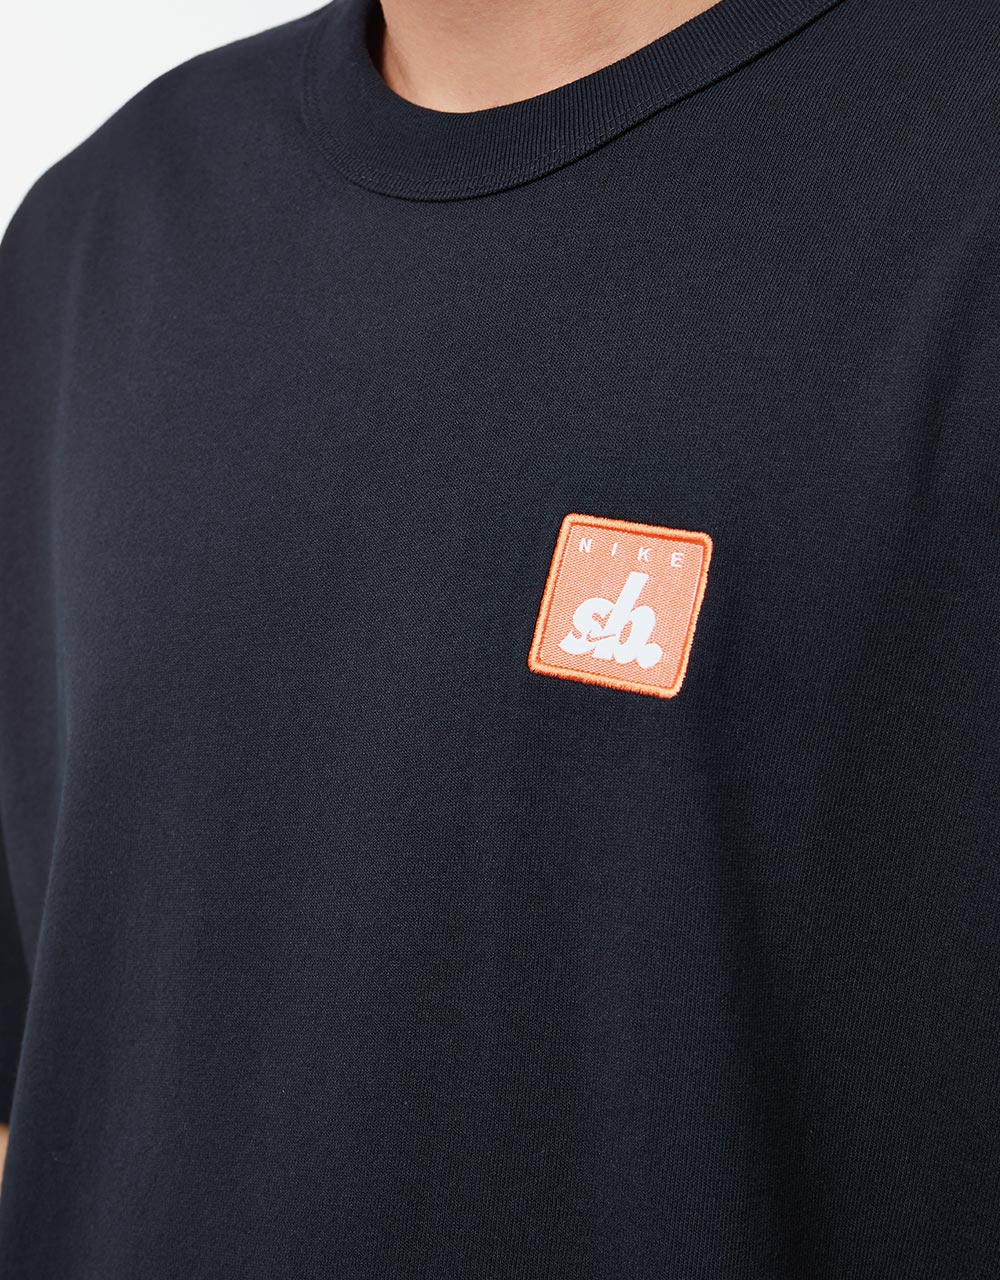 Nike SB Embroidered Patch T-Shirt - Black